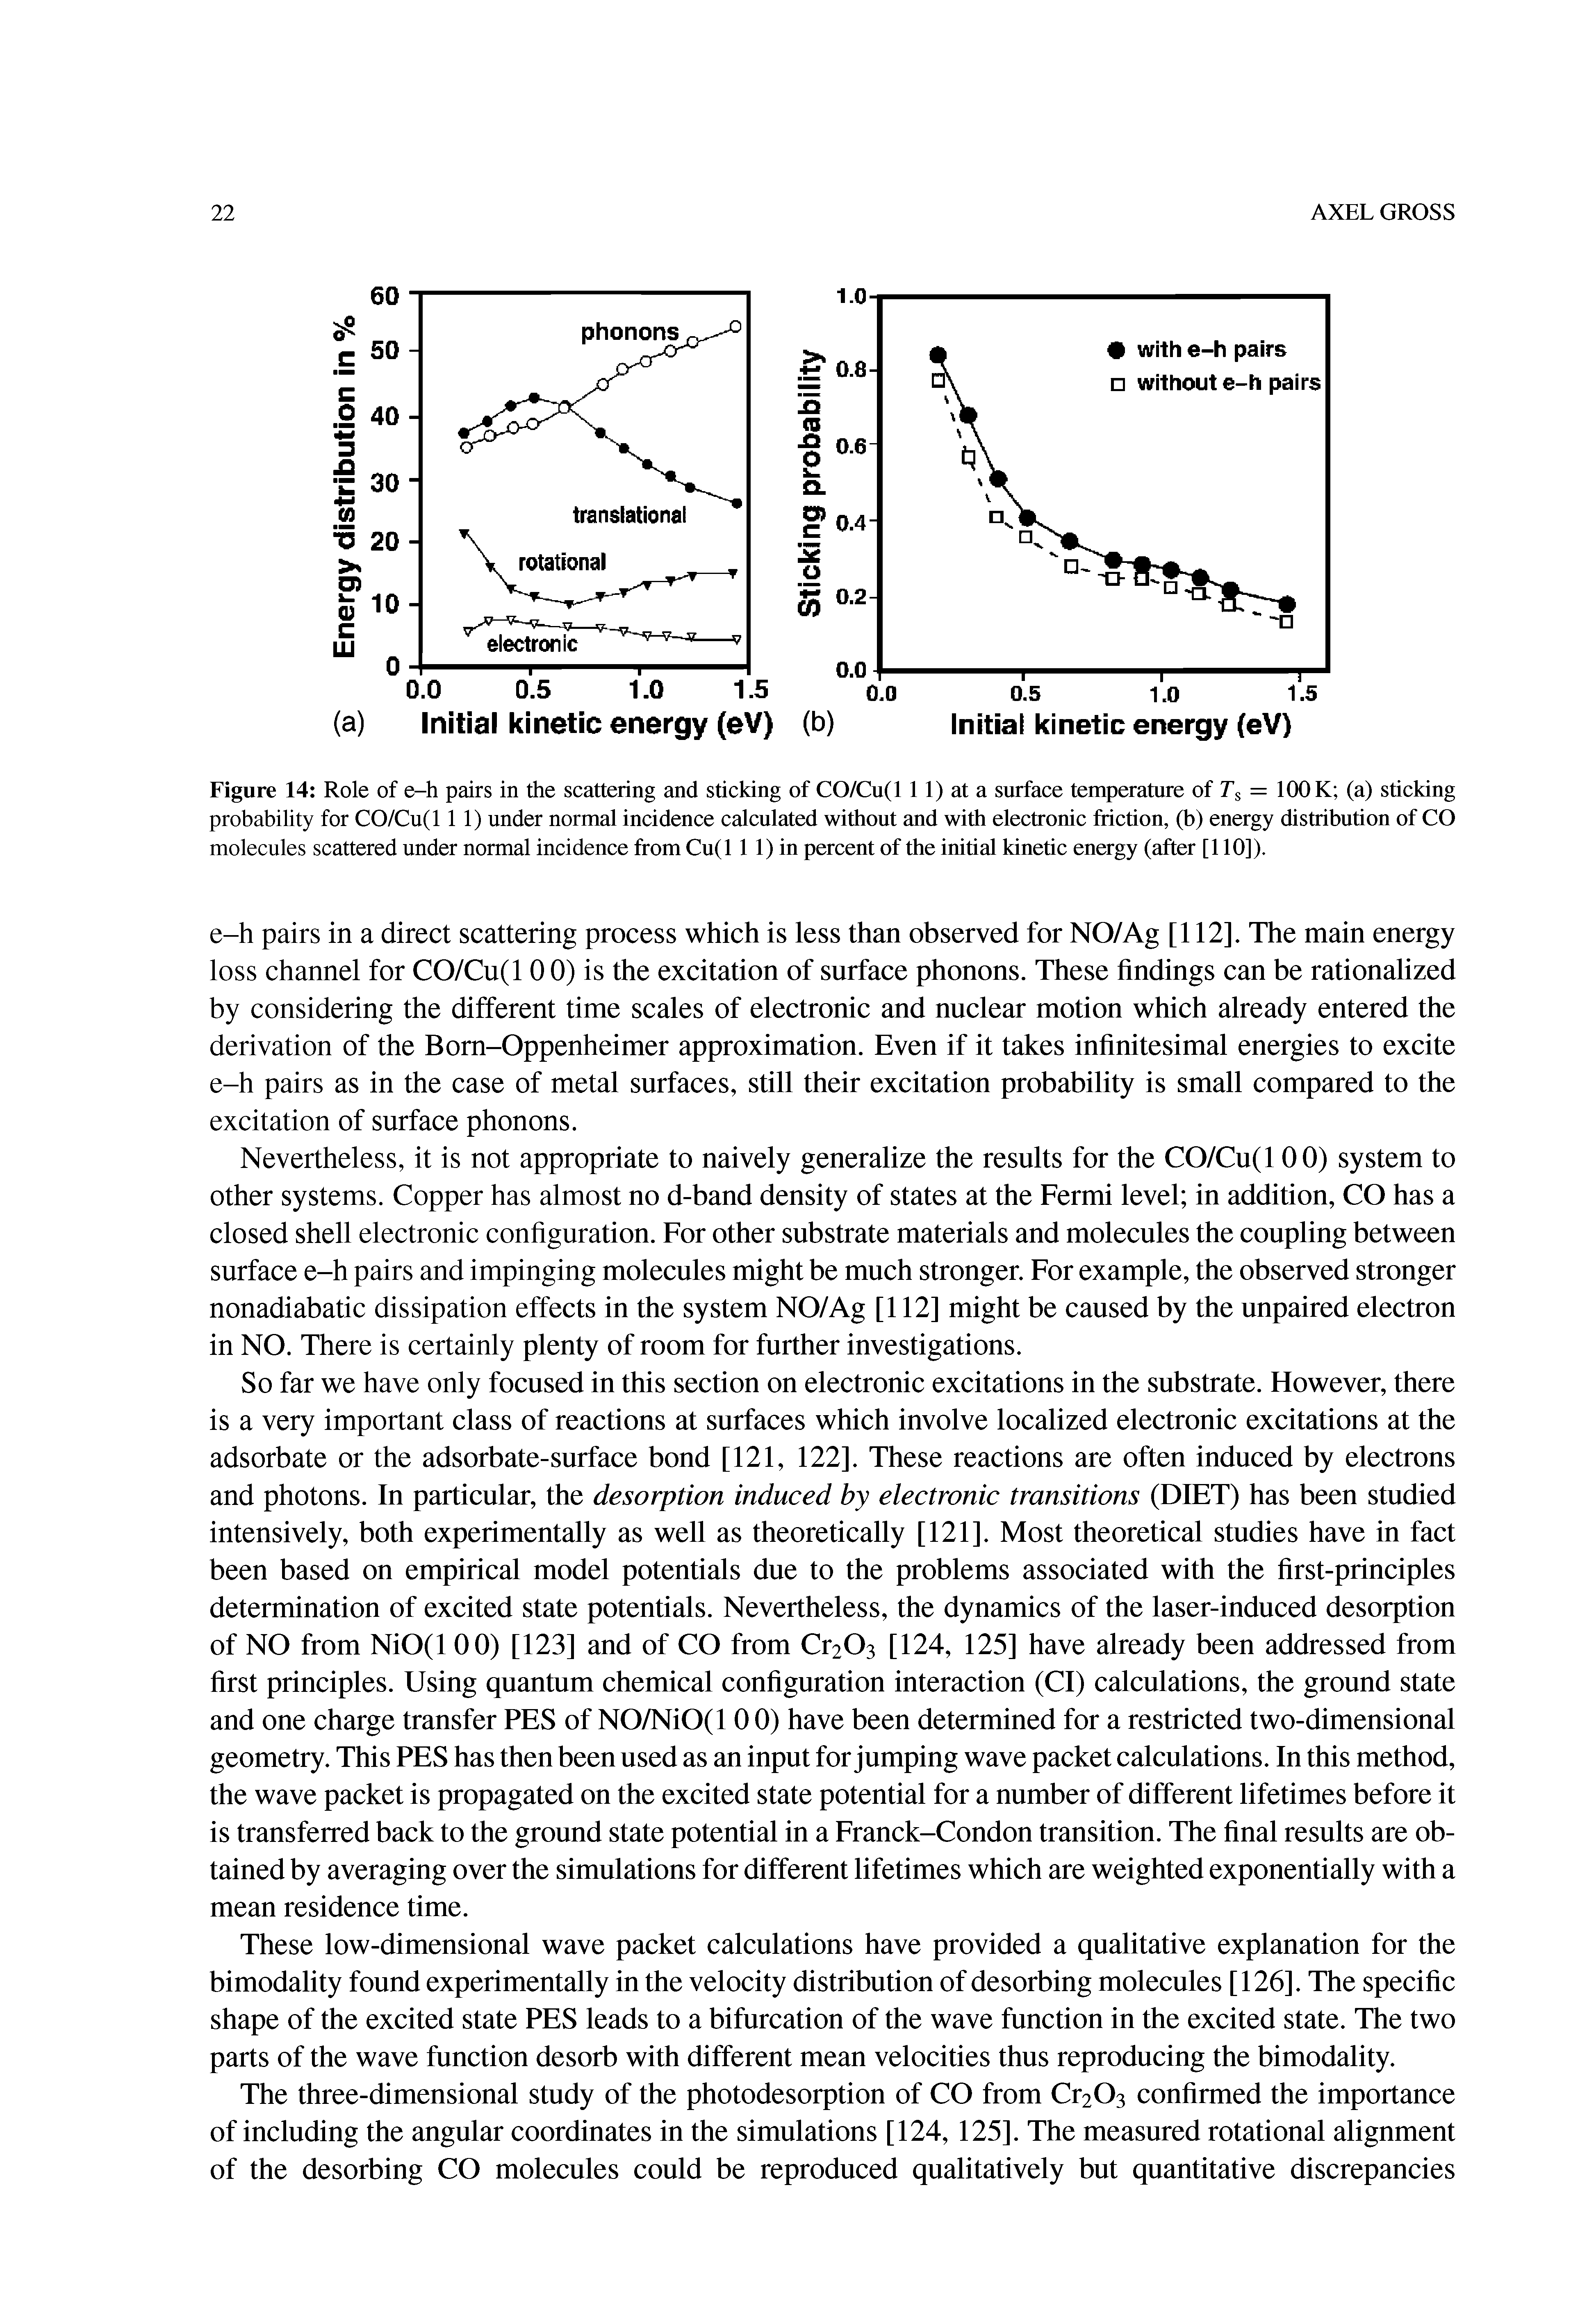 Figure 14 Role of e-h pairs in the scattering and sticking of CO/Cu(l 11) at a surface temperature of Ts = 100 K (a) sticking probability for CO/Cu(l 1 1) under normal incidence calculated without and with electronic friction, (b) energy distribution of CO molecules scattered under normal incidence from Cu(l 11) in percent of the initial kinetic energy (after [110]).